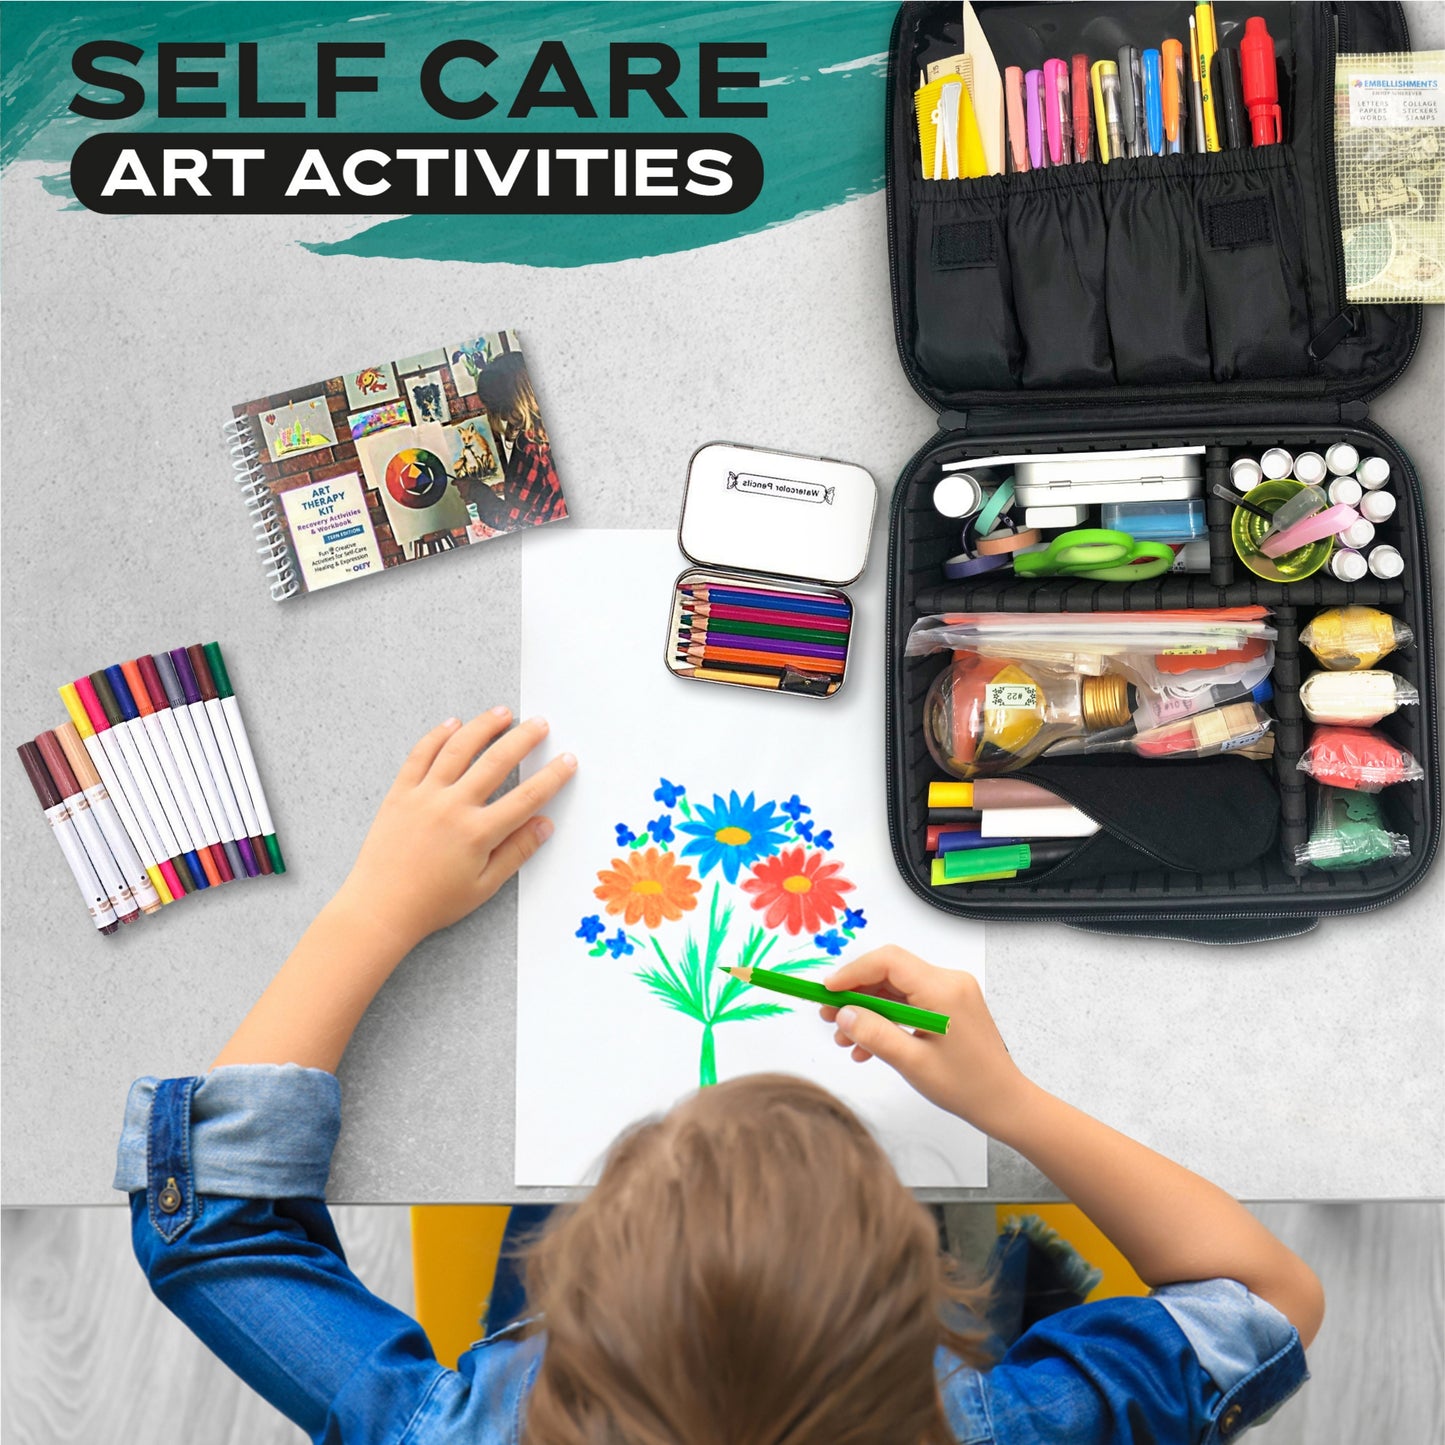 Expressive Art Therapy Supplies Kit - 20+ Art Therapy Activities, Alternative Art Projects - Anxiety Tools, Coping Skills, Clarify Thoughts, Therapy Supplies for Emotional Health, Wellness Kit by Oefy